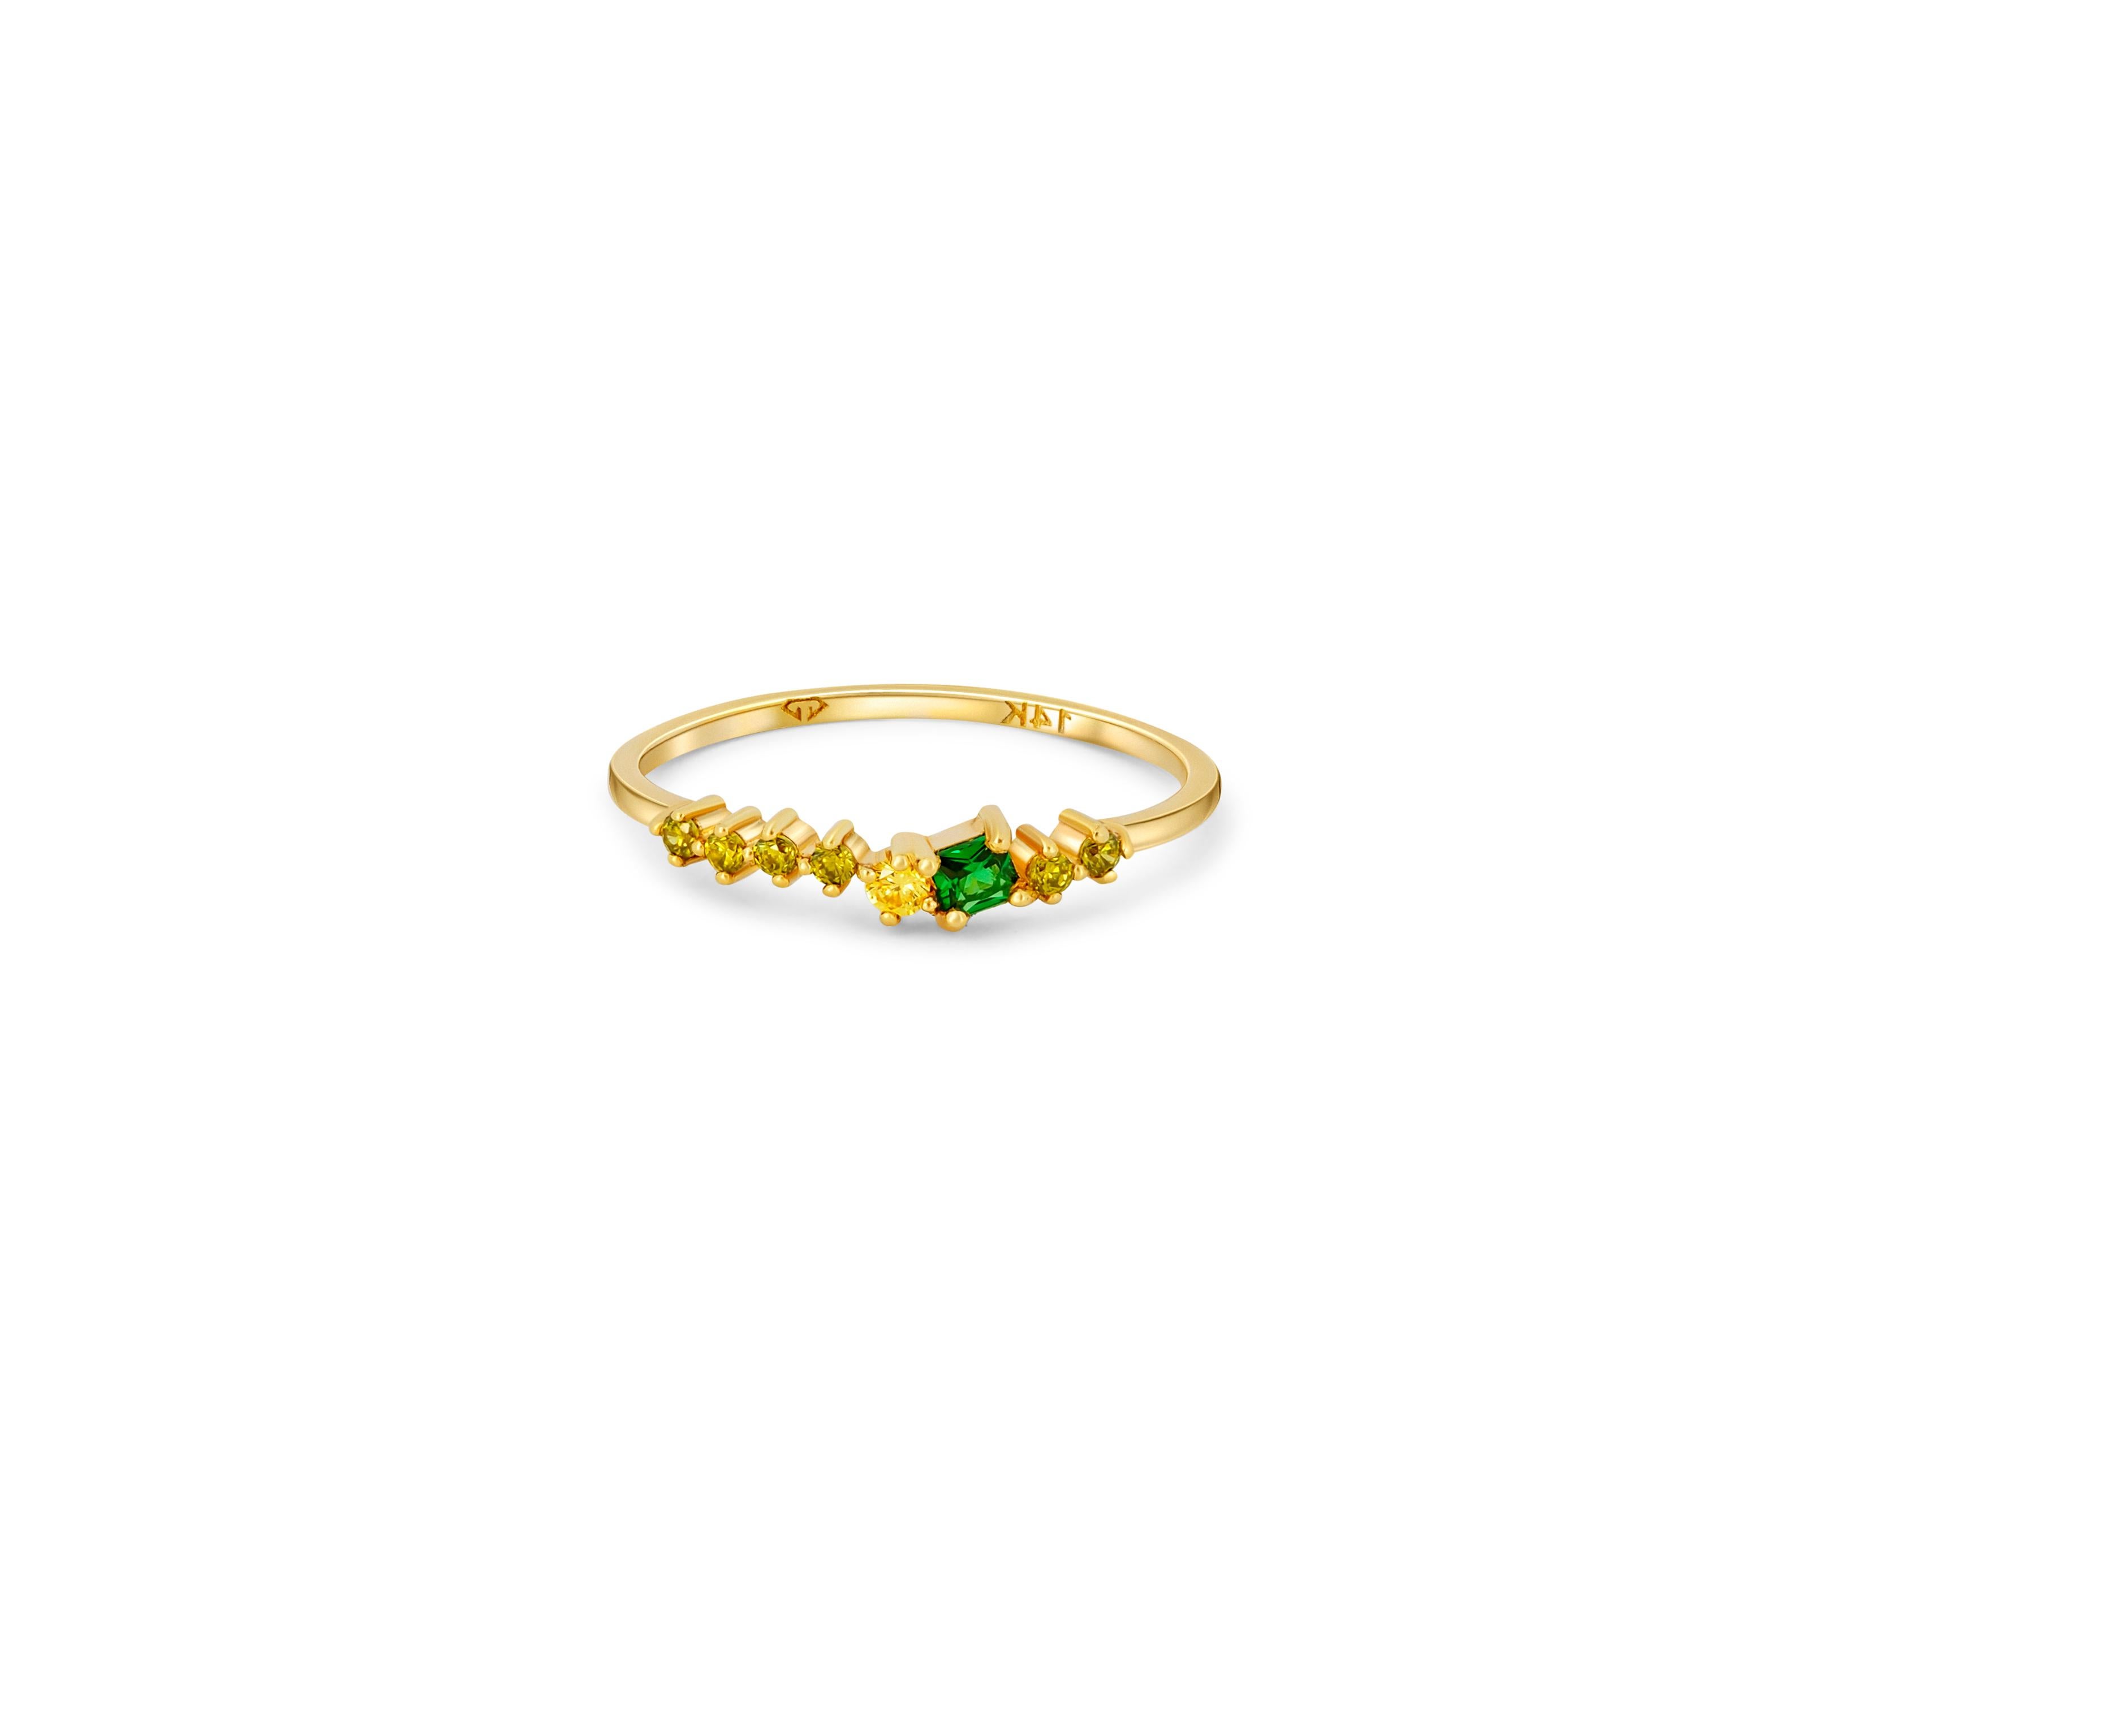 Mixed color cluster 14k gold engagement ring.  Multicolor gold ring. Mixed Stone Cluster Ring. Alternative Engagement Ring. Unique Lab Emerald, sapphires and peridots Stackable Delicate Ring.

Metal: 14k gold
Weight: 1.3 gr depends from